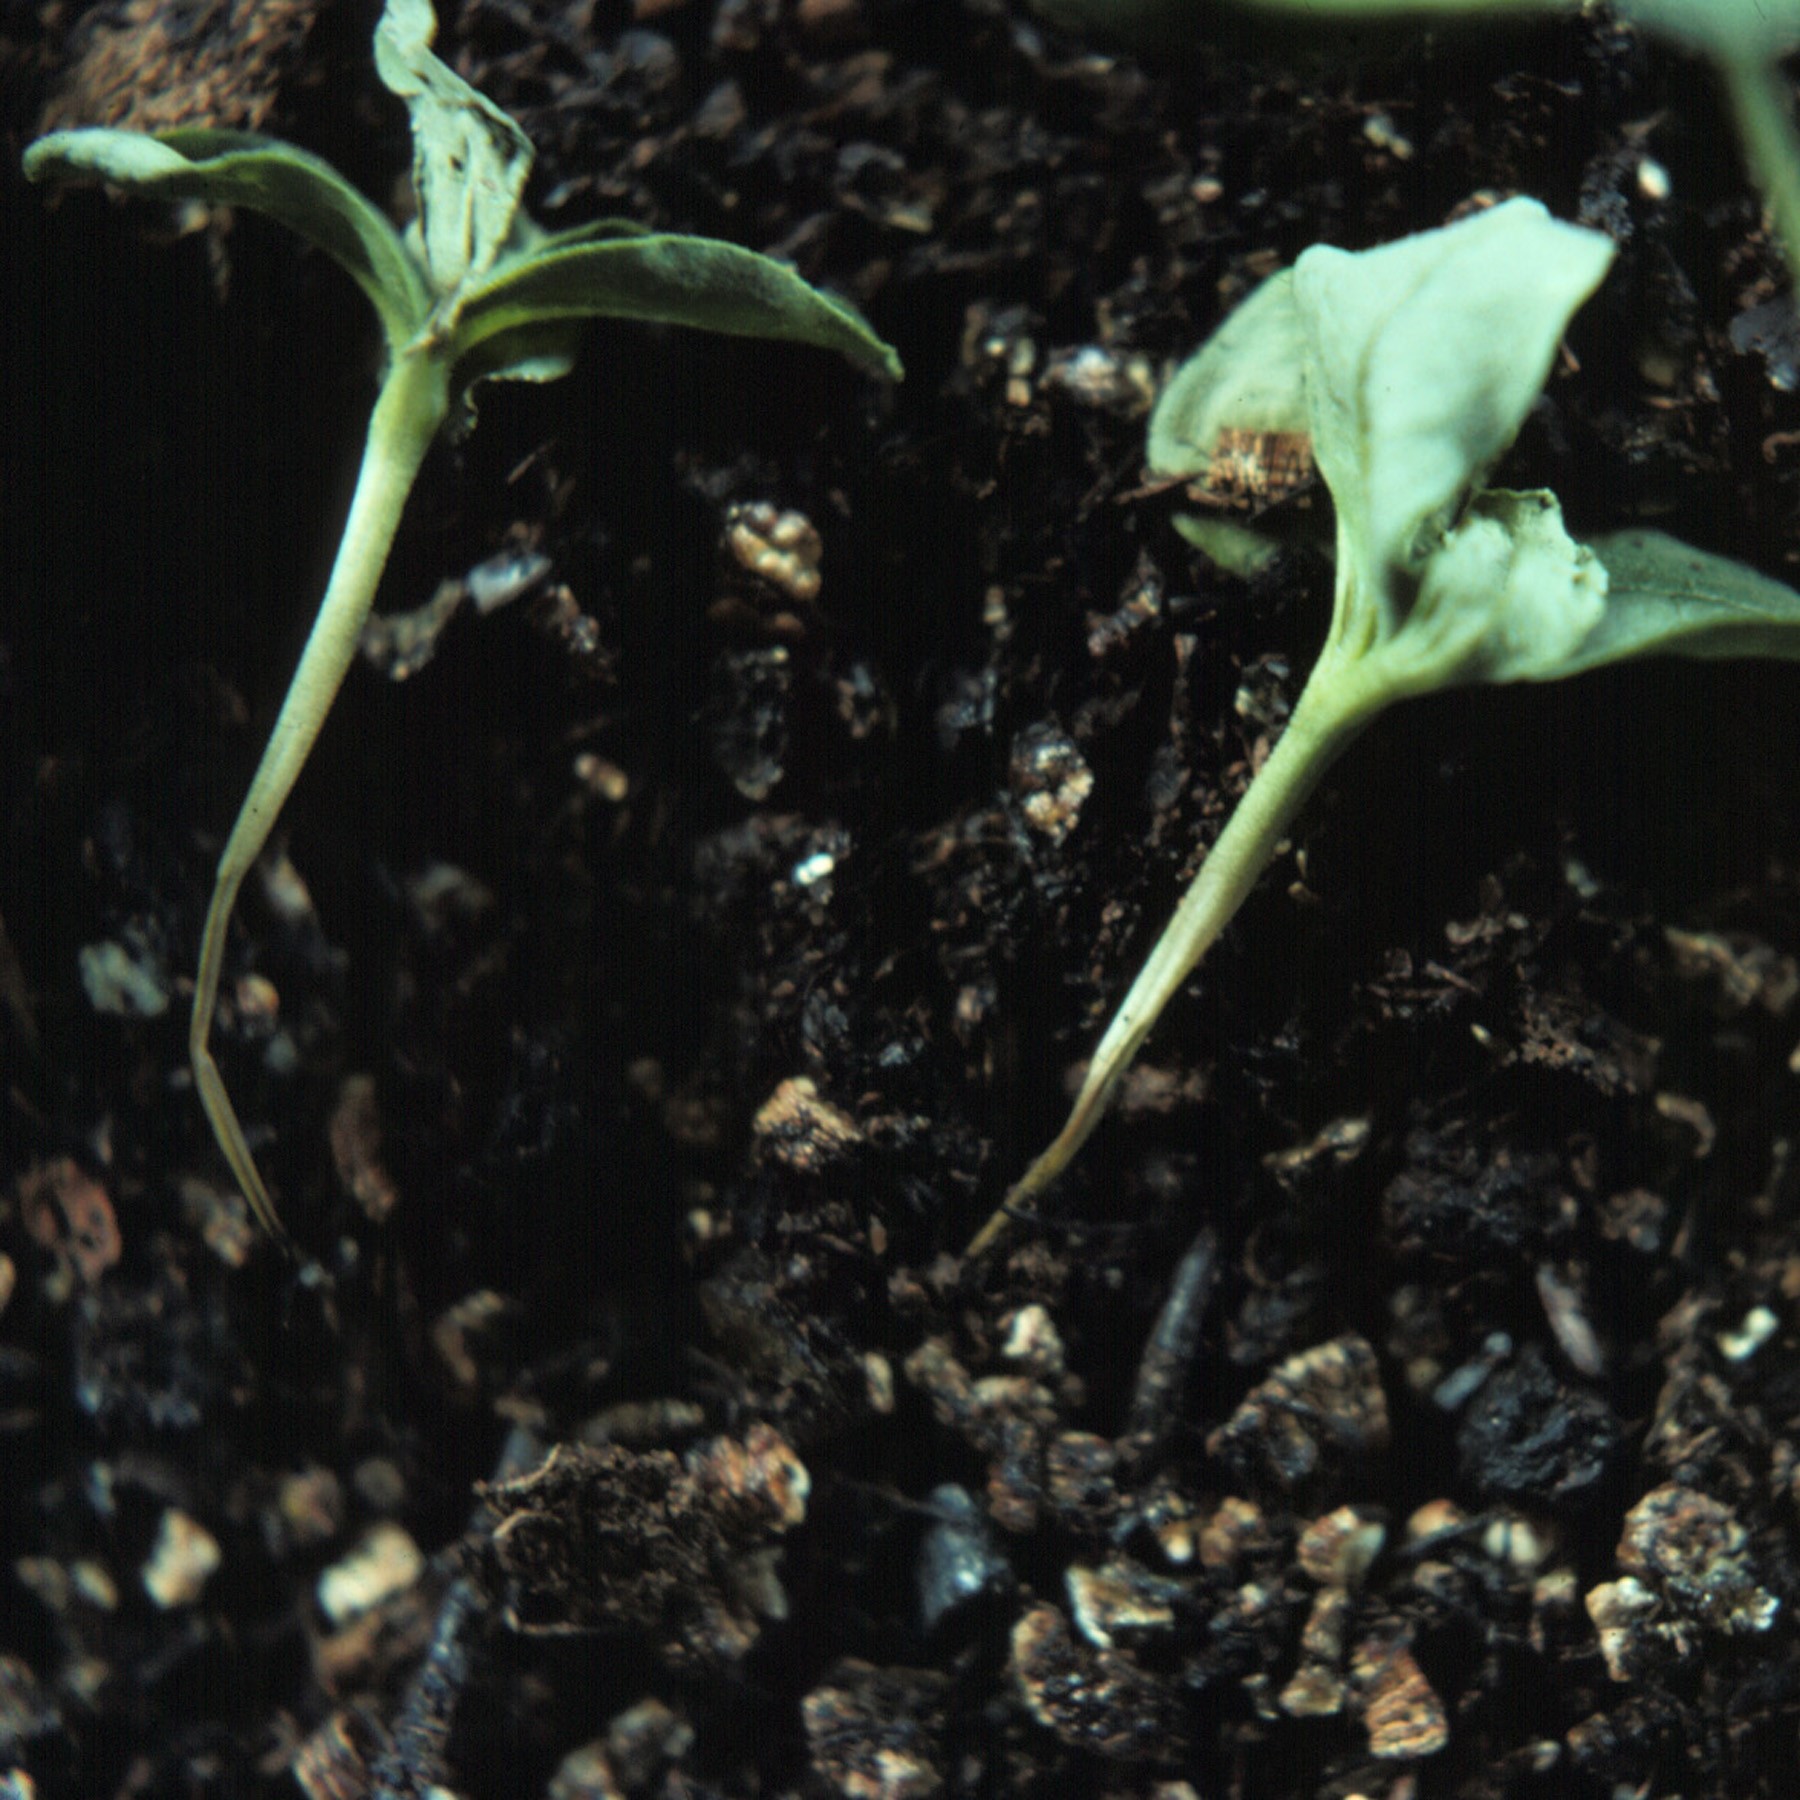 Image of nearly dead seedling